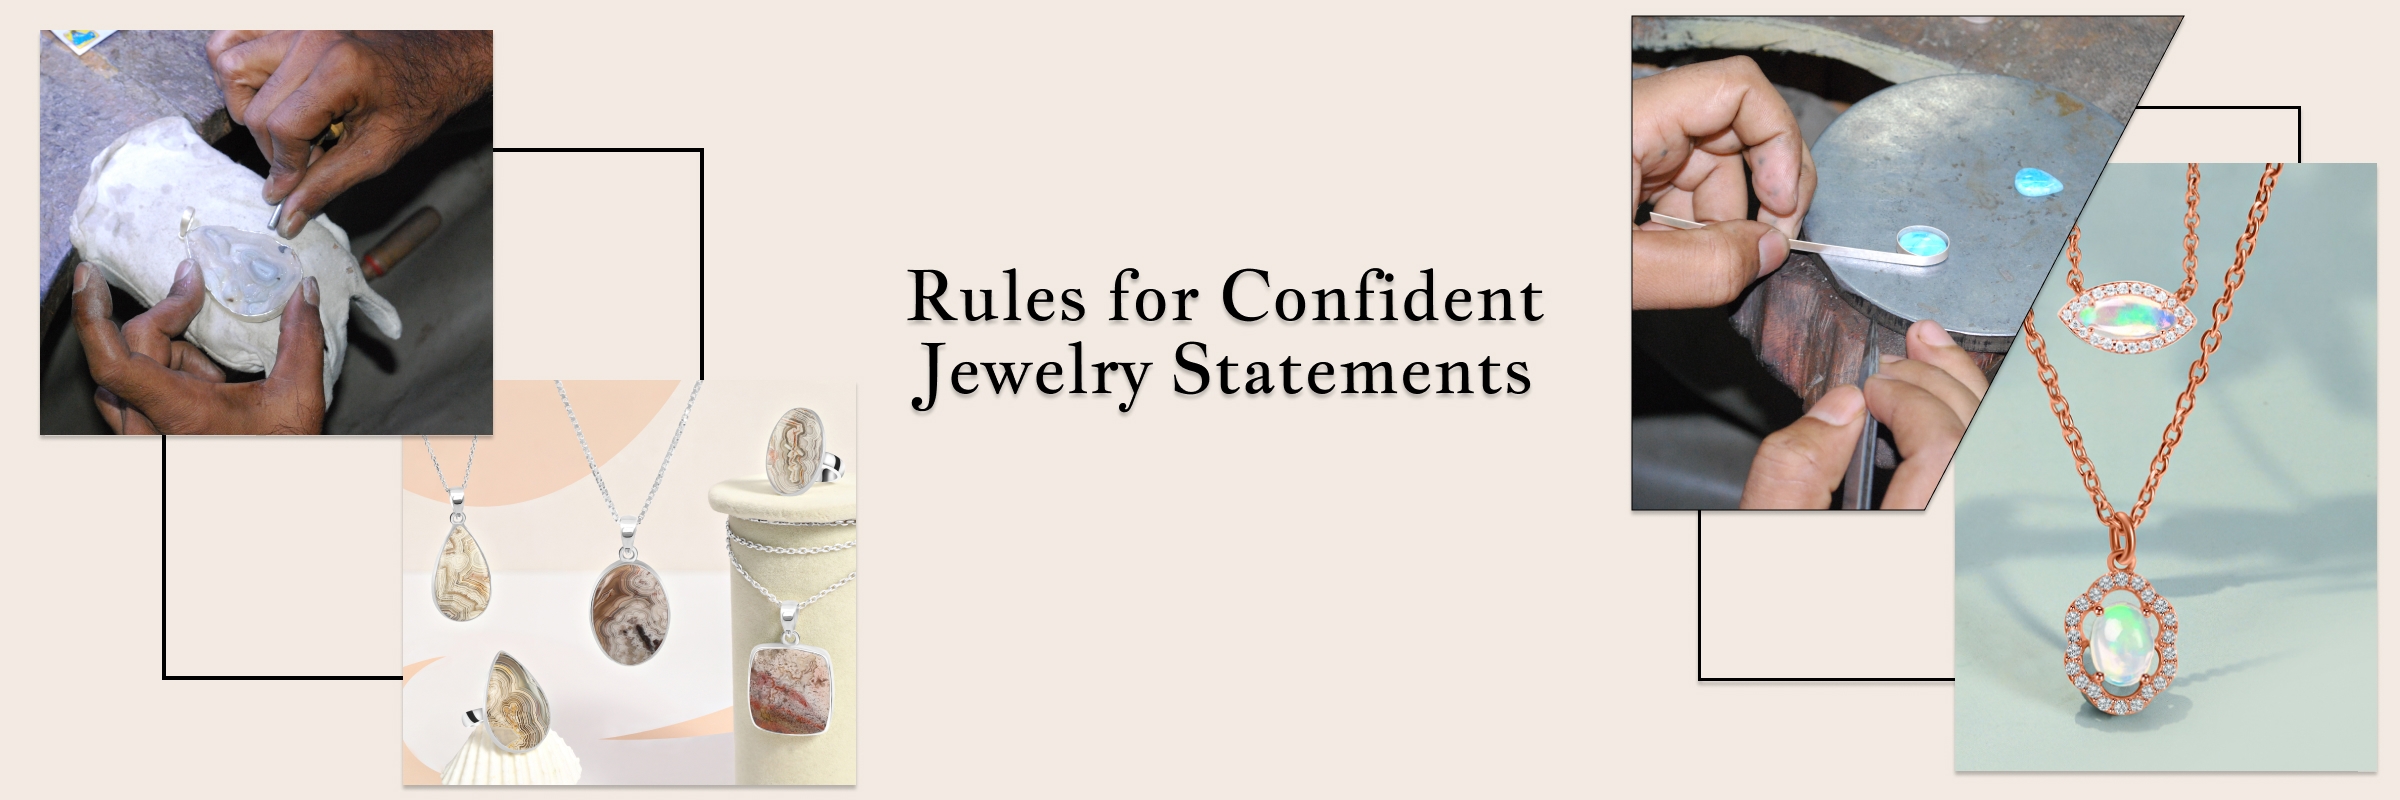 Some General Rules for Wearing Statement Jewelry with Confidence